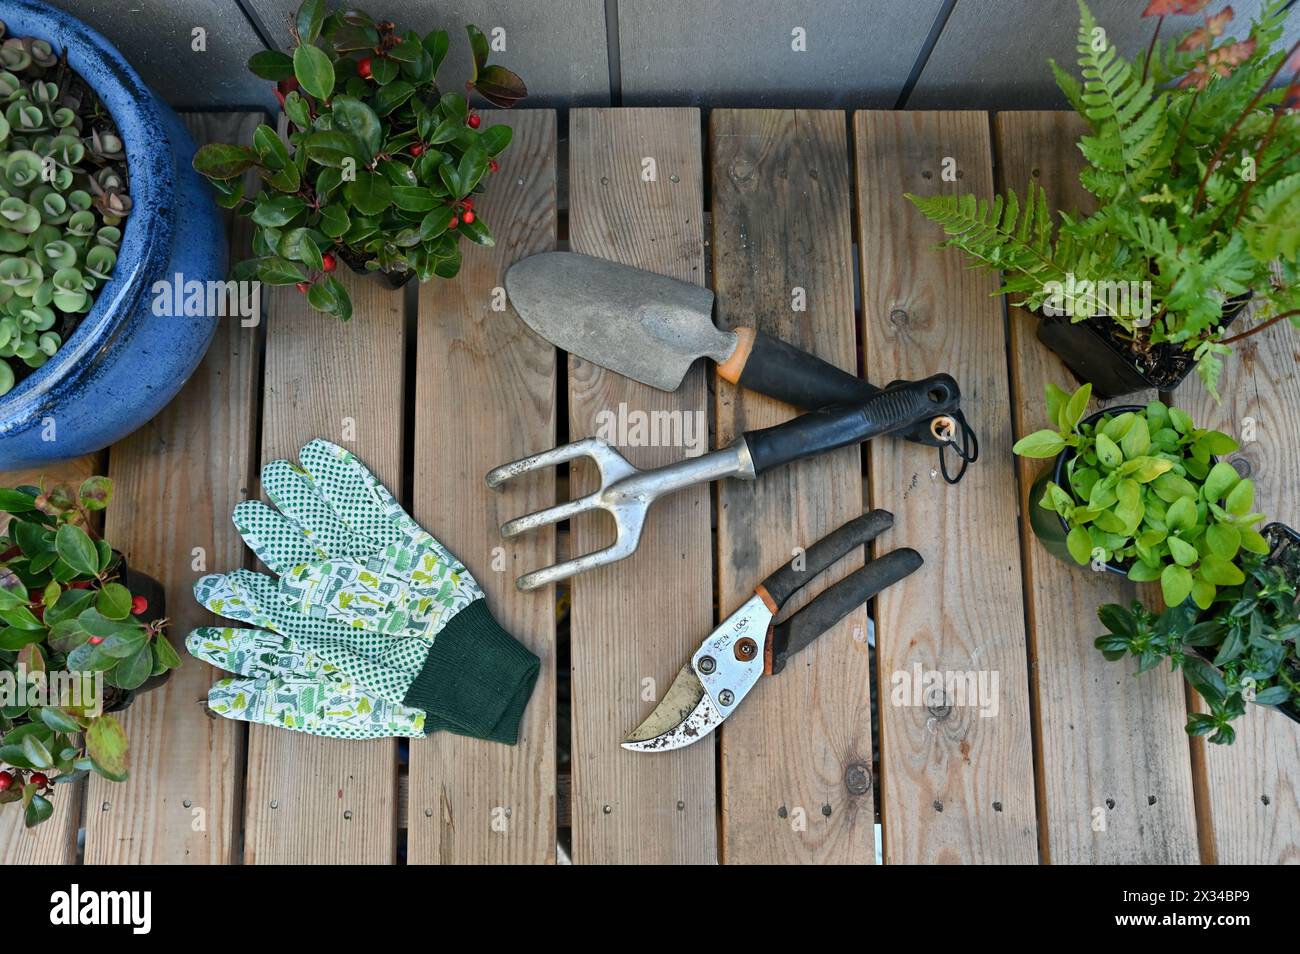 Spring garden potting bench with garden equipment tools for yard work clean up. Stock Photo